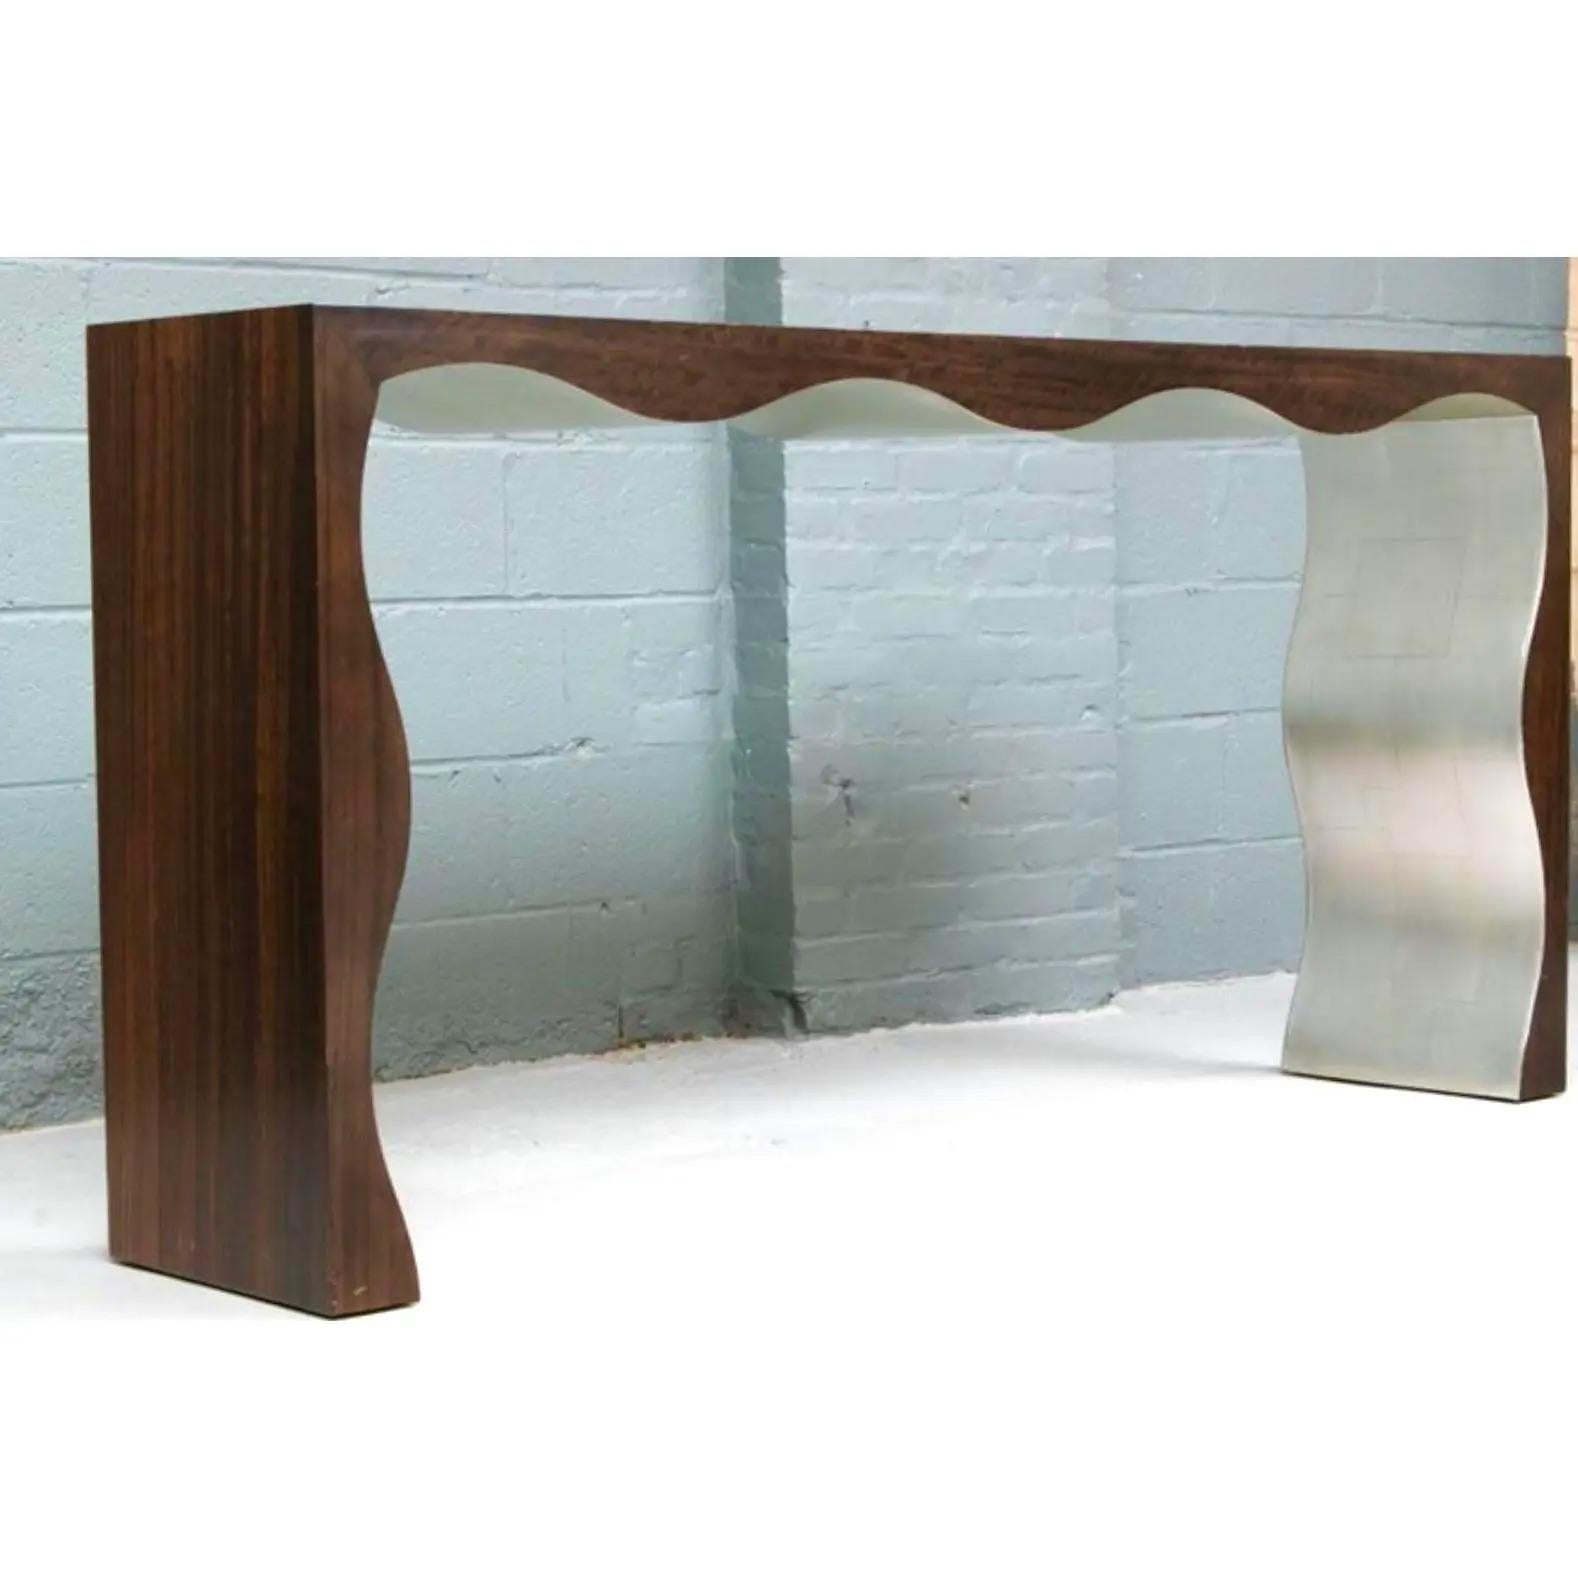 A fantastic vintage custom console table. A sleek Contemporary design with a wood grain frame and a silver leaf bottom. A winding ruffle edge adds to the frame. Acquired from a Palm Beach estate.